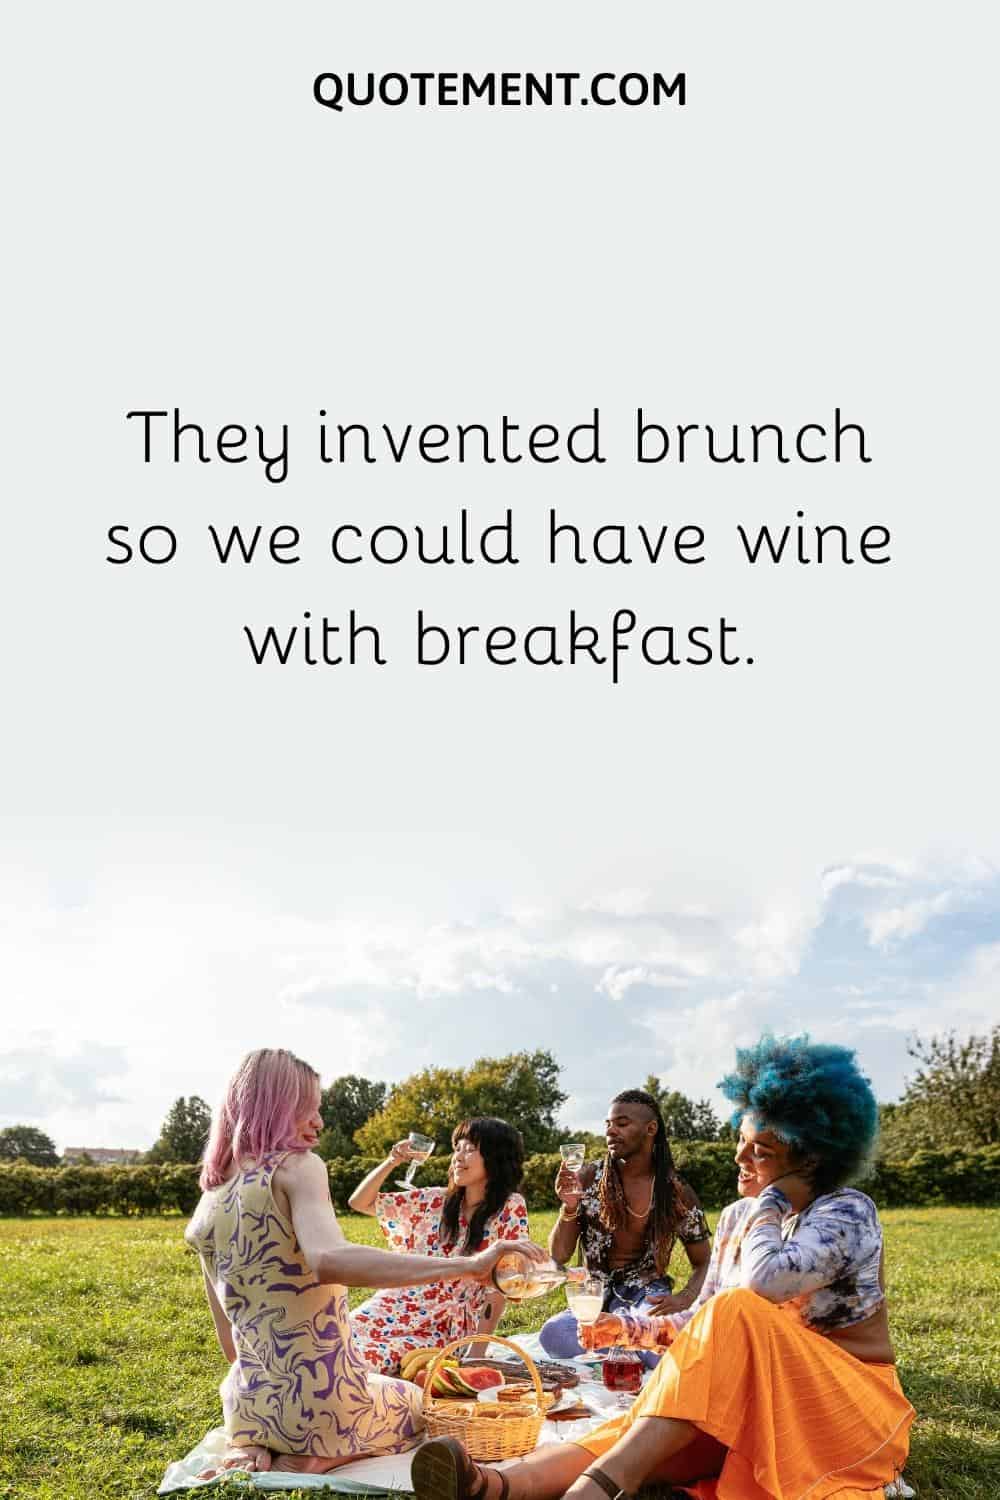 They invented brunch so we could have wine with breakfast.